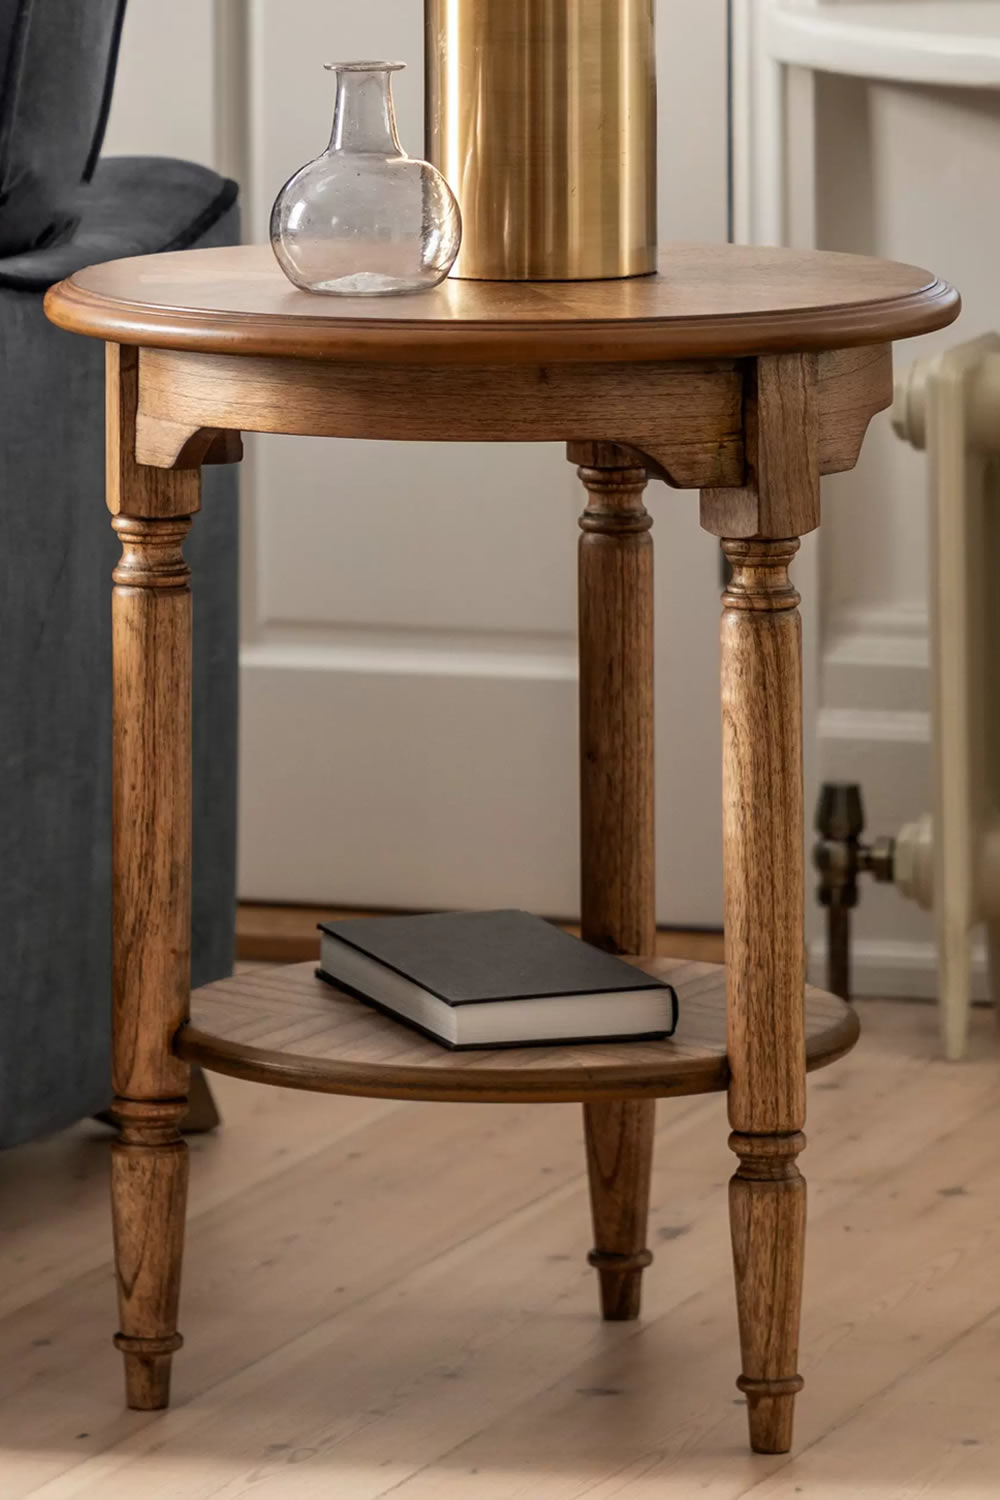 View Highgrove Round Antique Brown Wooded 2Tier Side Table Crafted From Mindi Wood With Marquetry Inlaid Details Space Saving Design information